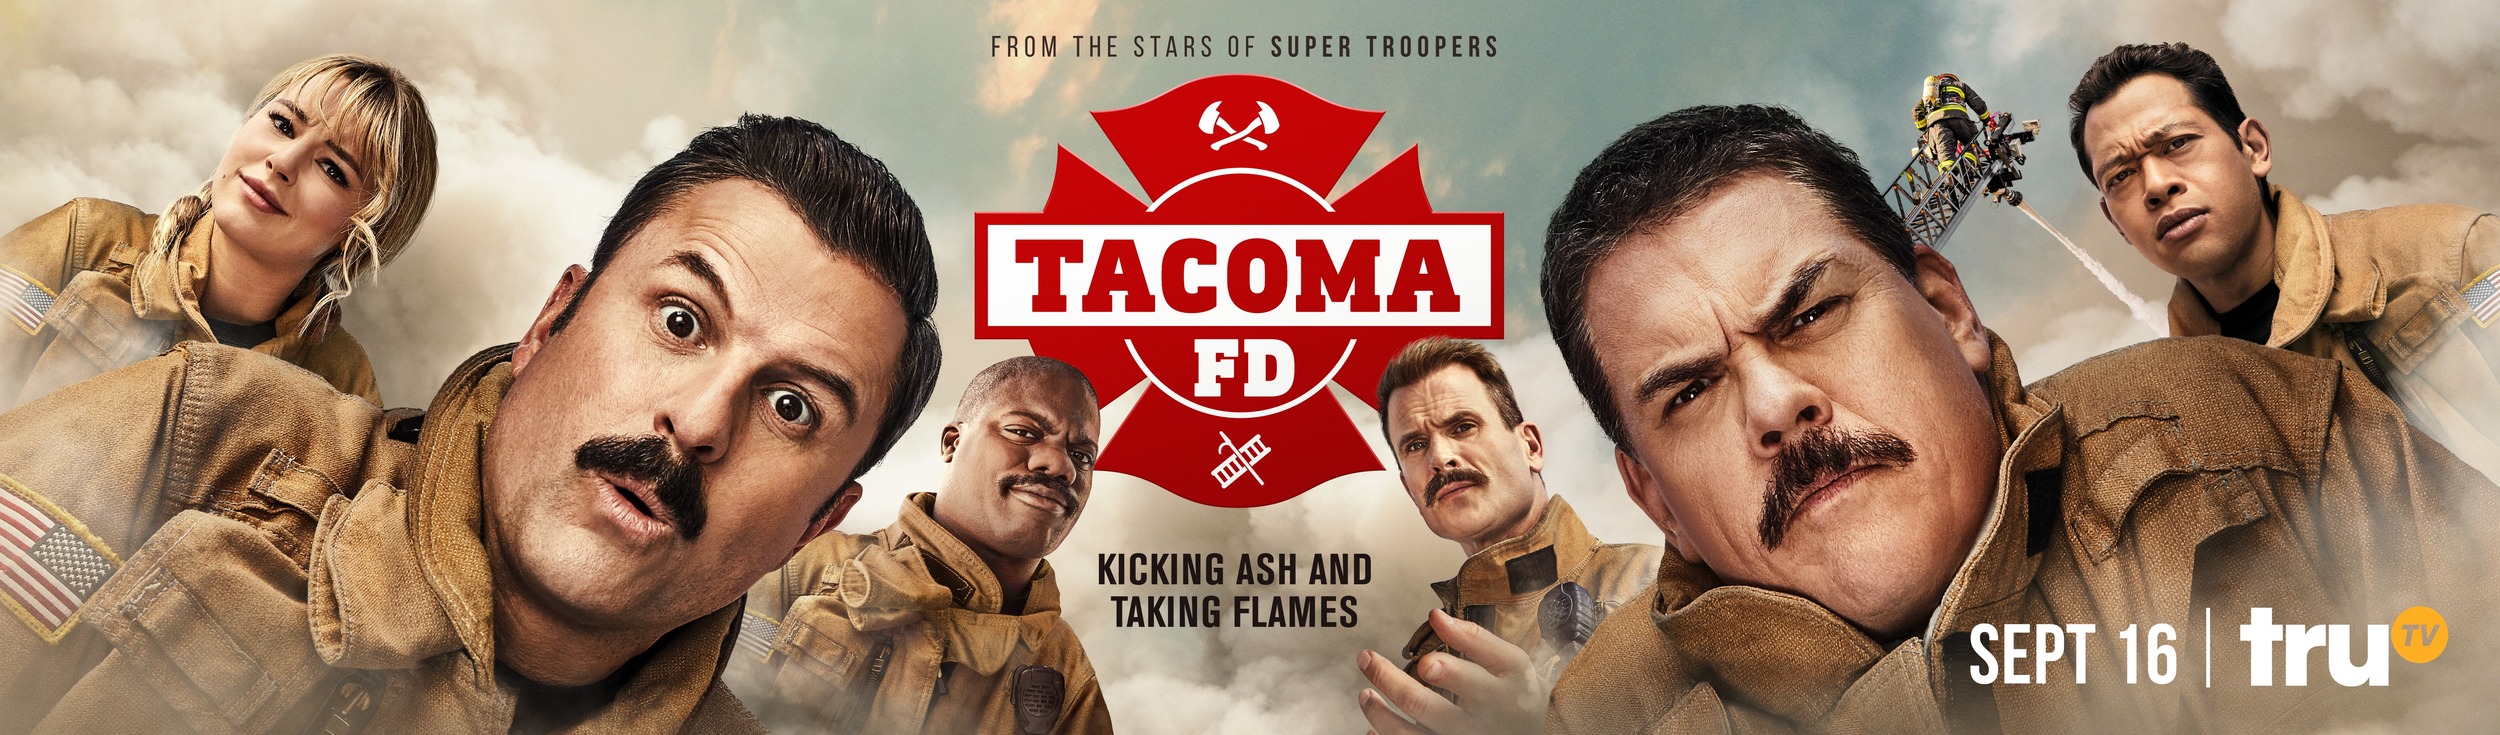 Mega Sized TV Poster Image for Tacoma FD (#5 of 6)